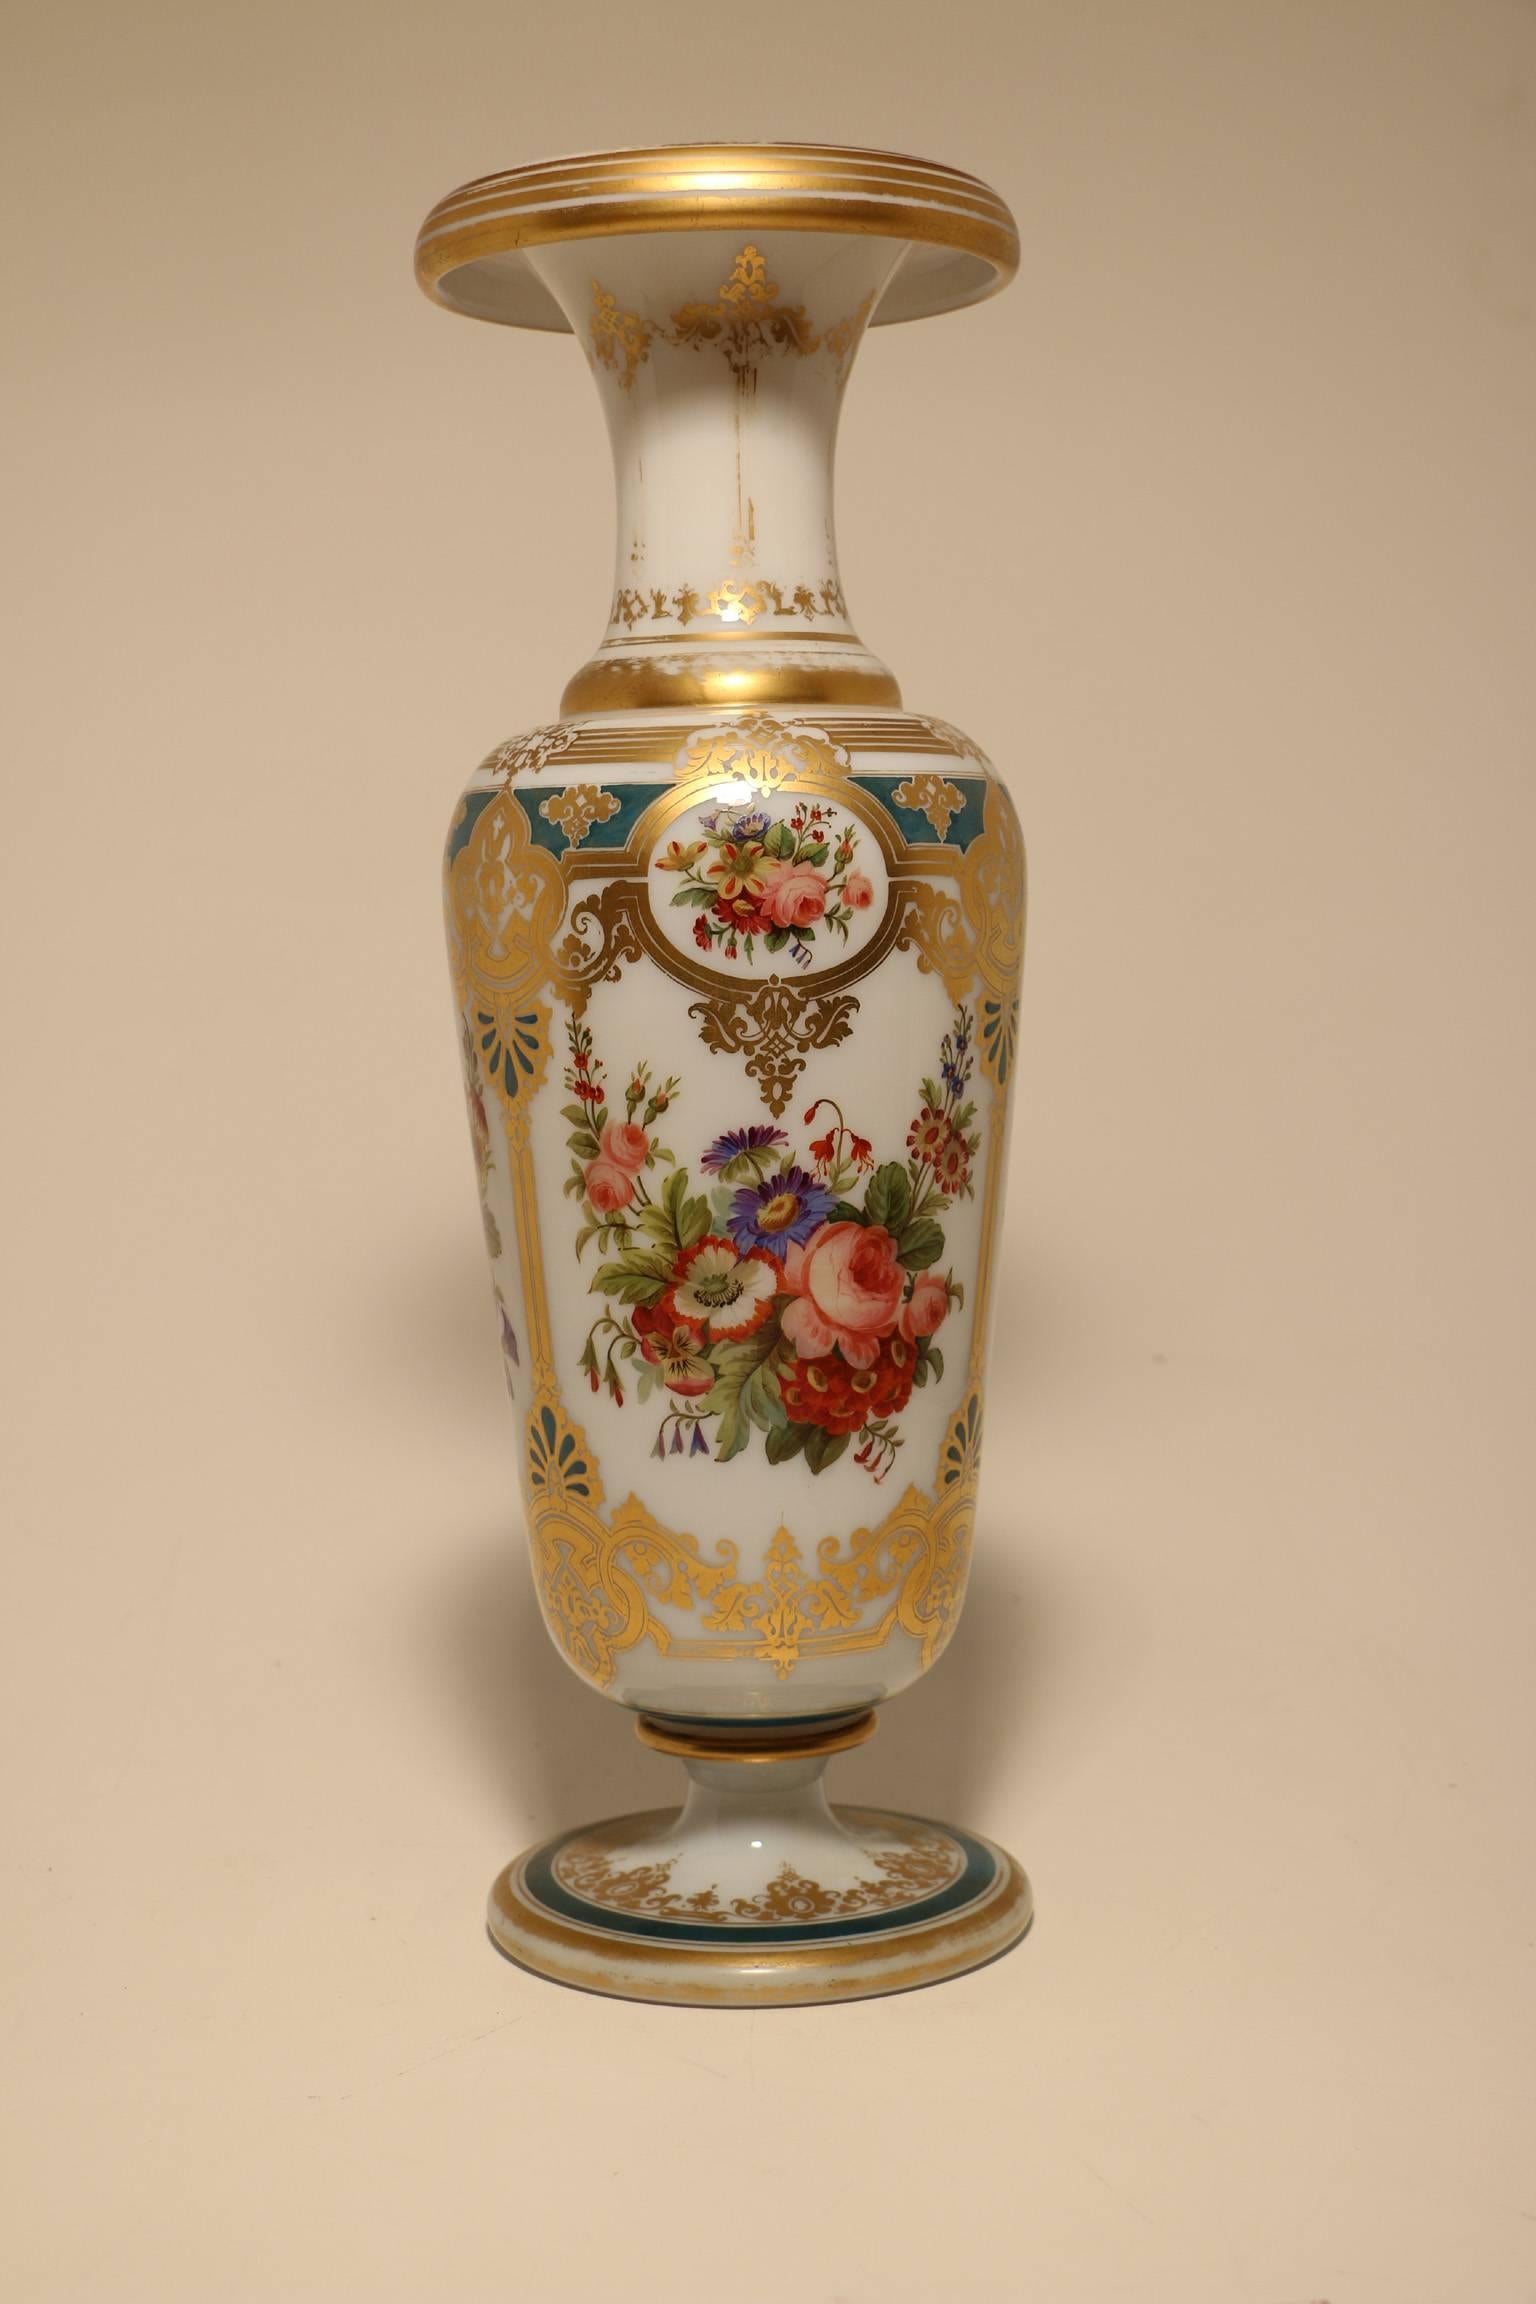 Dating from around the middle of the 19th Century, we attribute this vase to Baccarat and possibly the hand of Jean François Robert. Robert. who had been a painter at the Sèvres porcelain factory, executed fine quality gilt and enameled